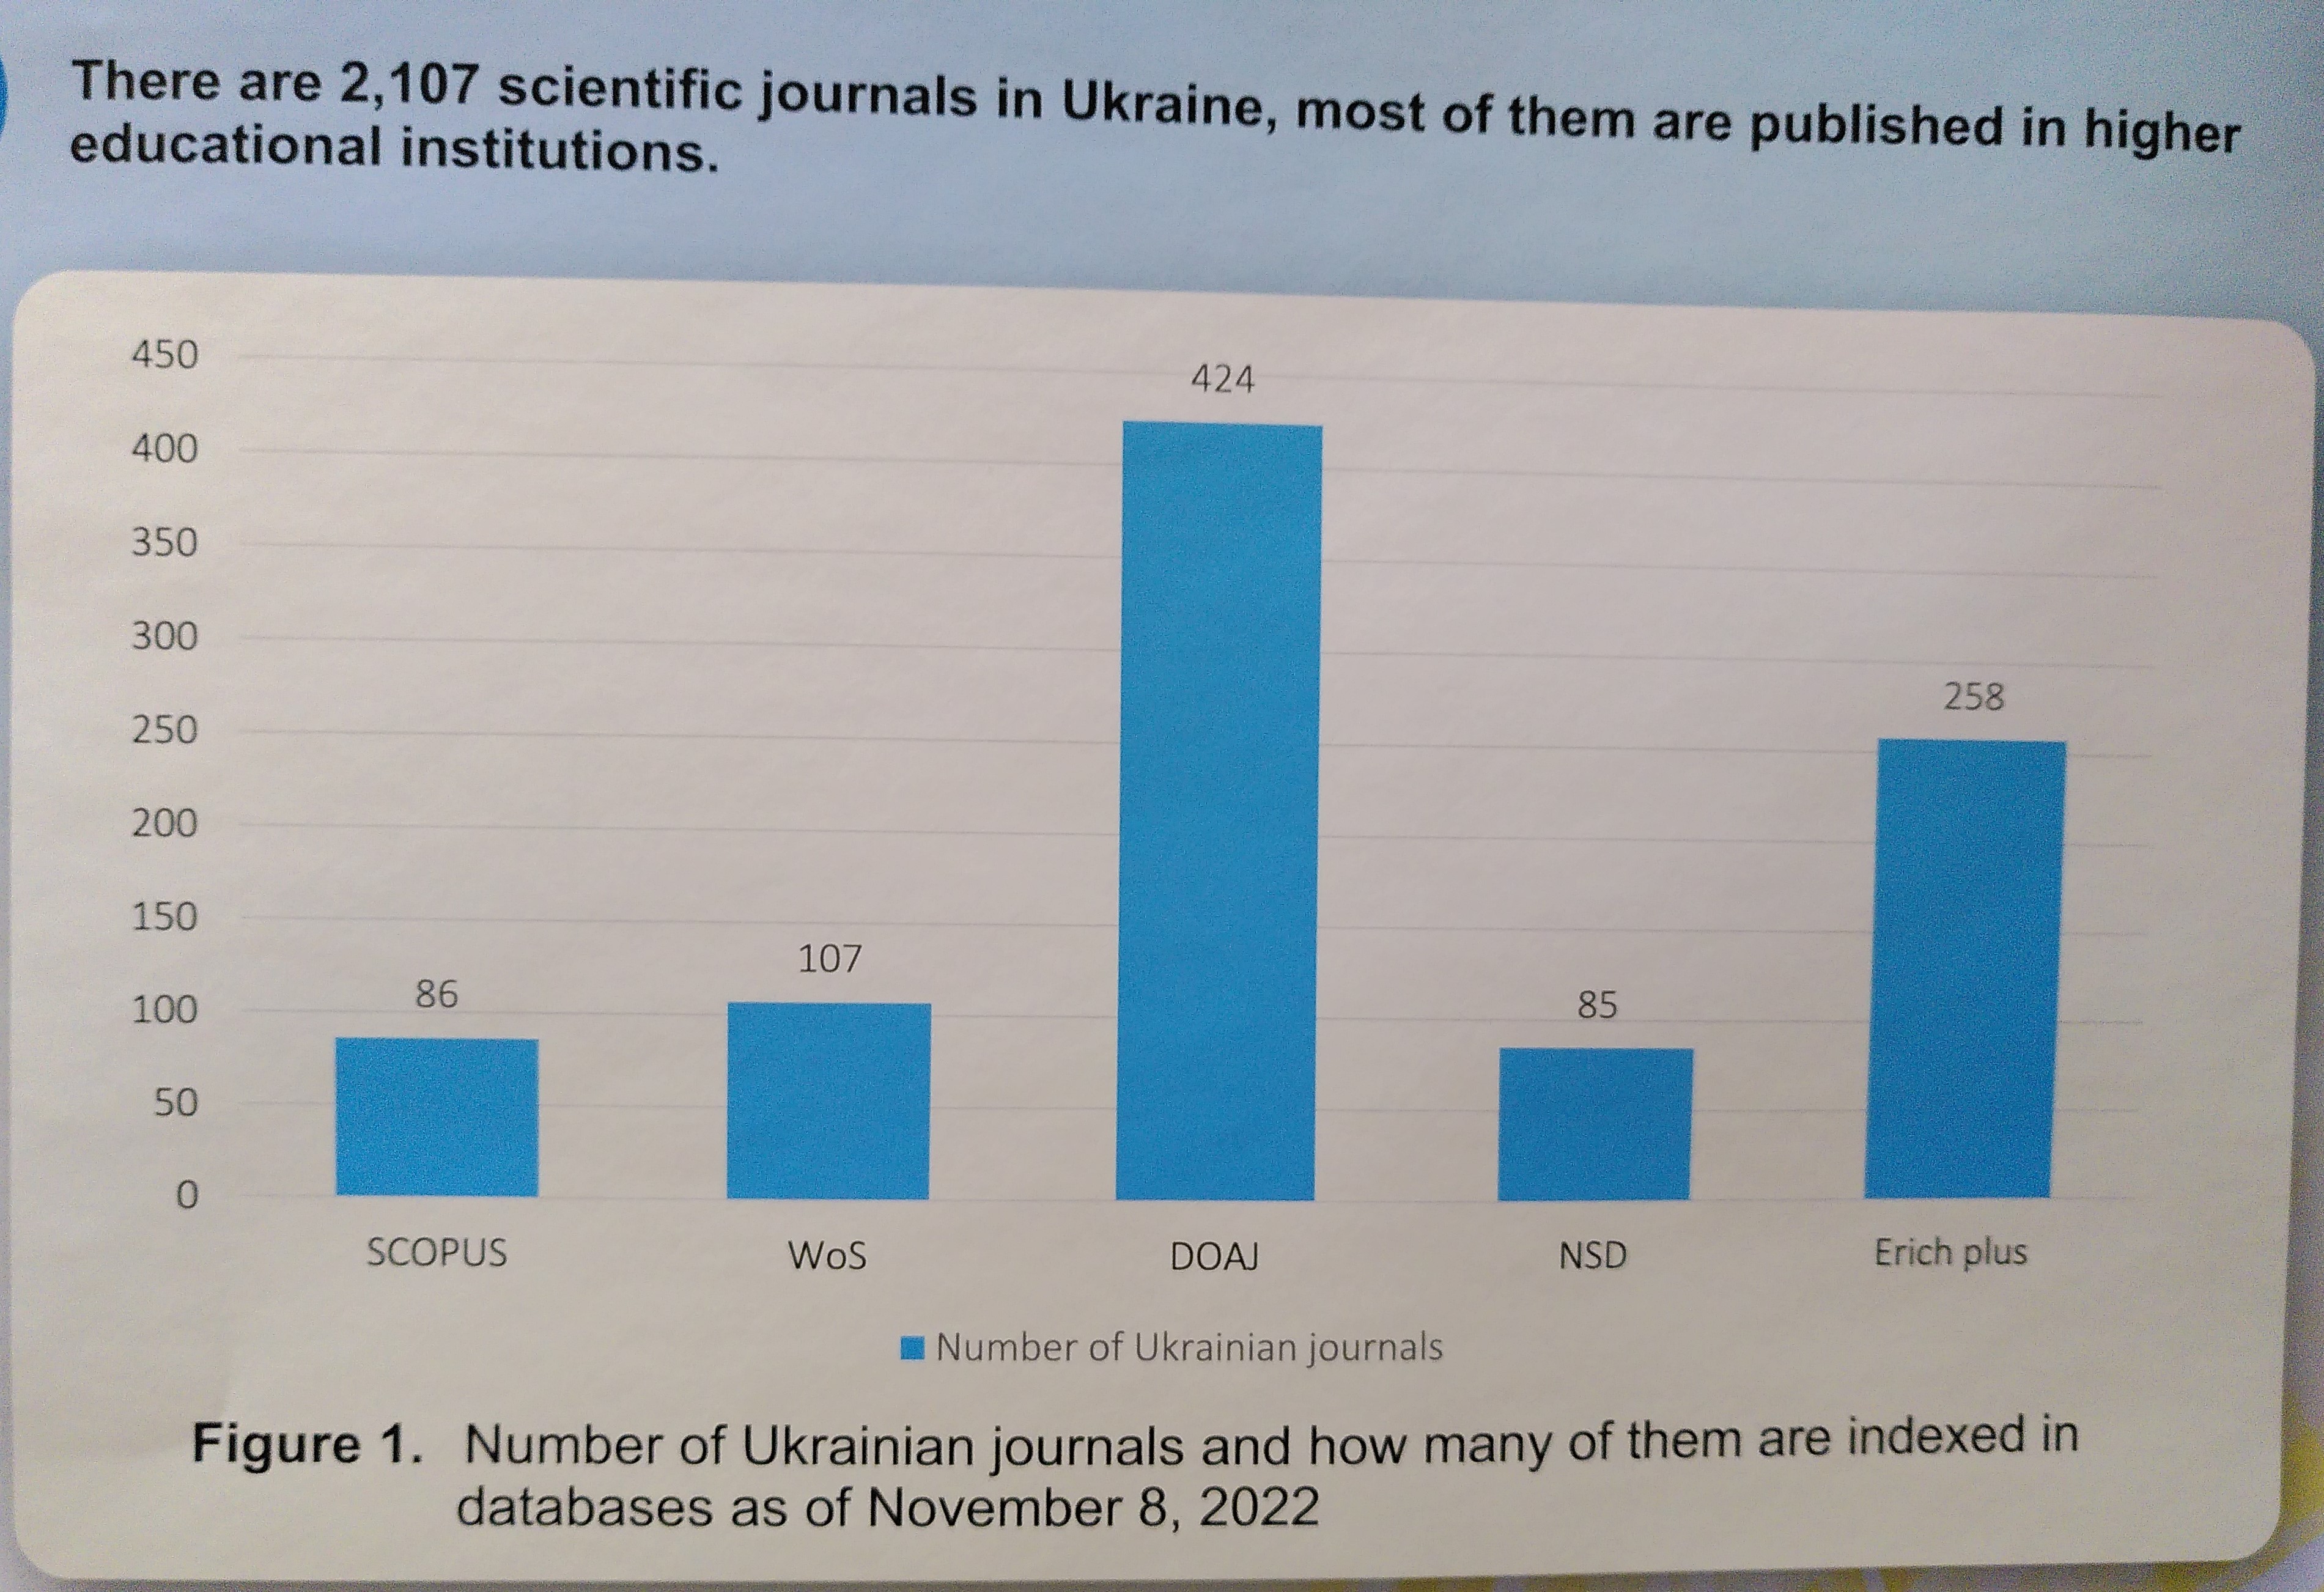 A graph showing that DOAJ indexes more Ukrainian journals than Scopus, WoS, NSD, and Enrich